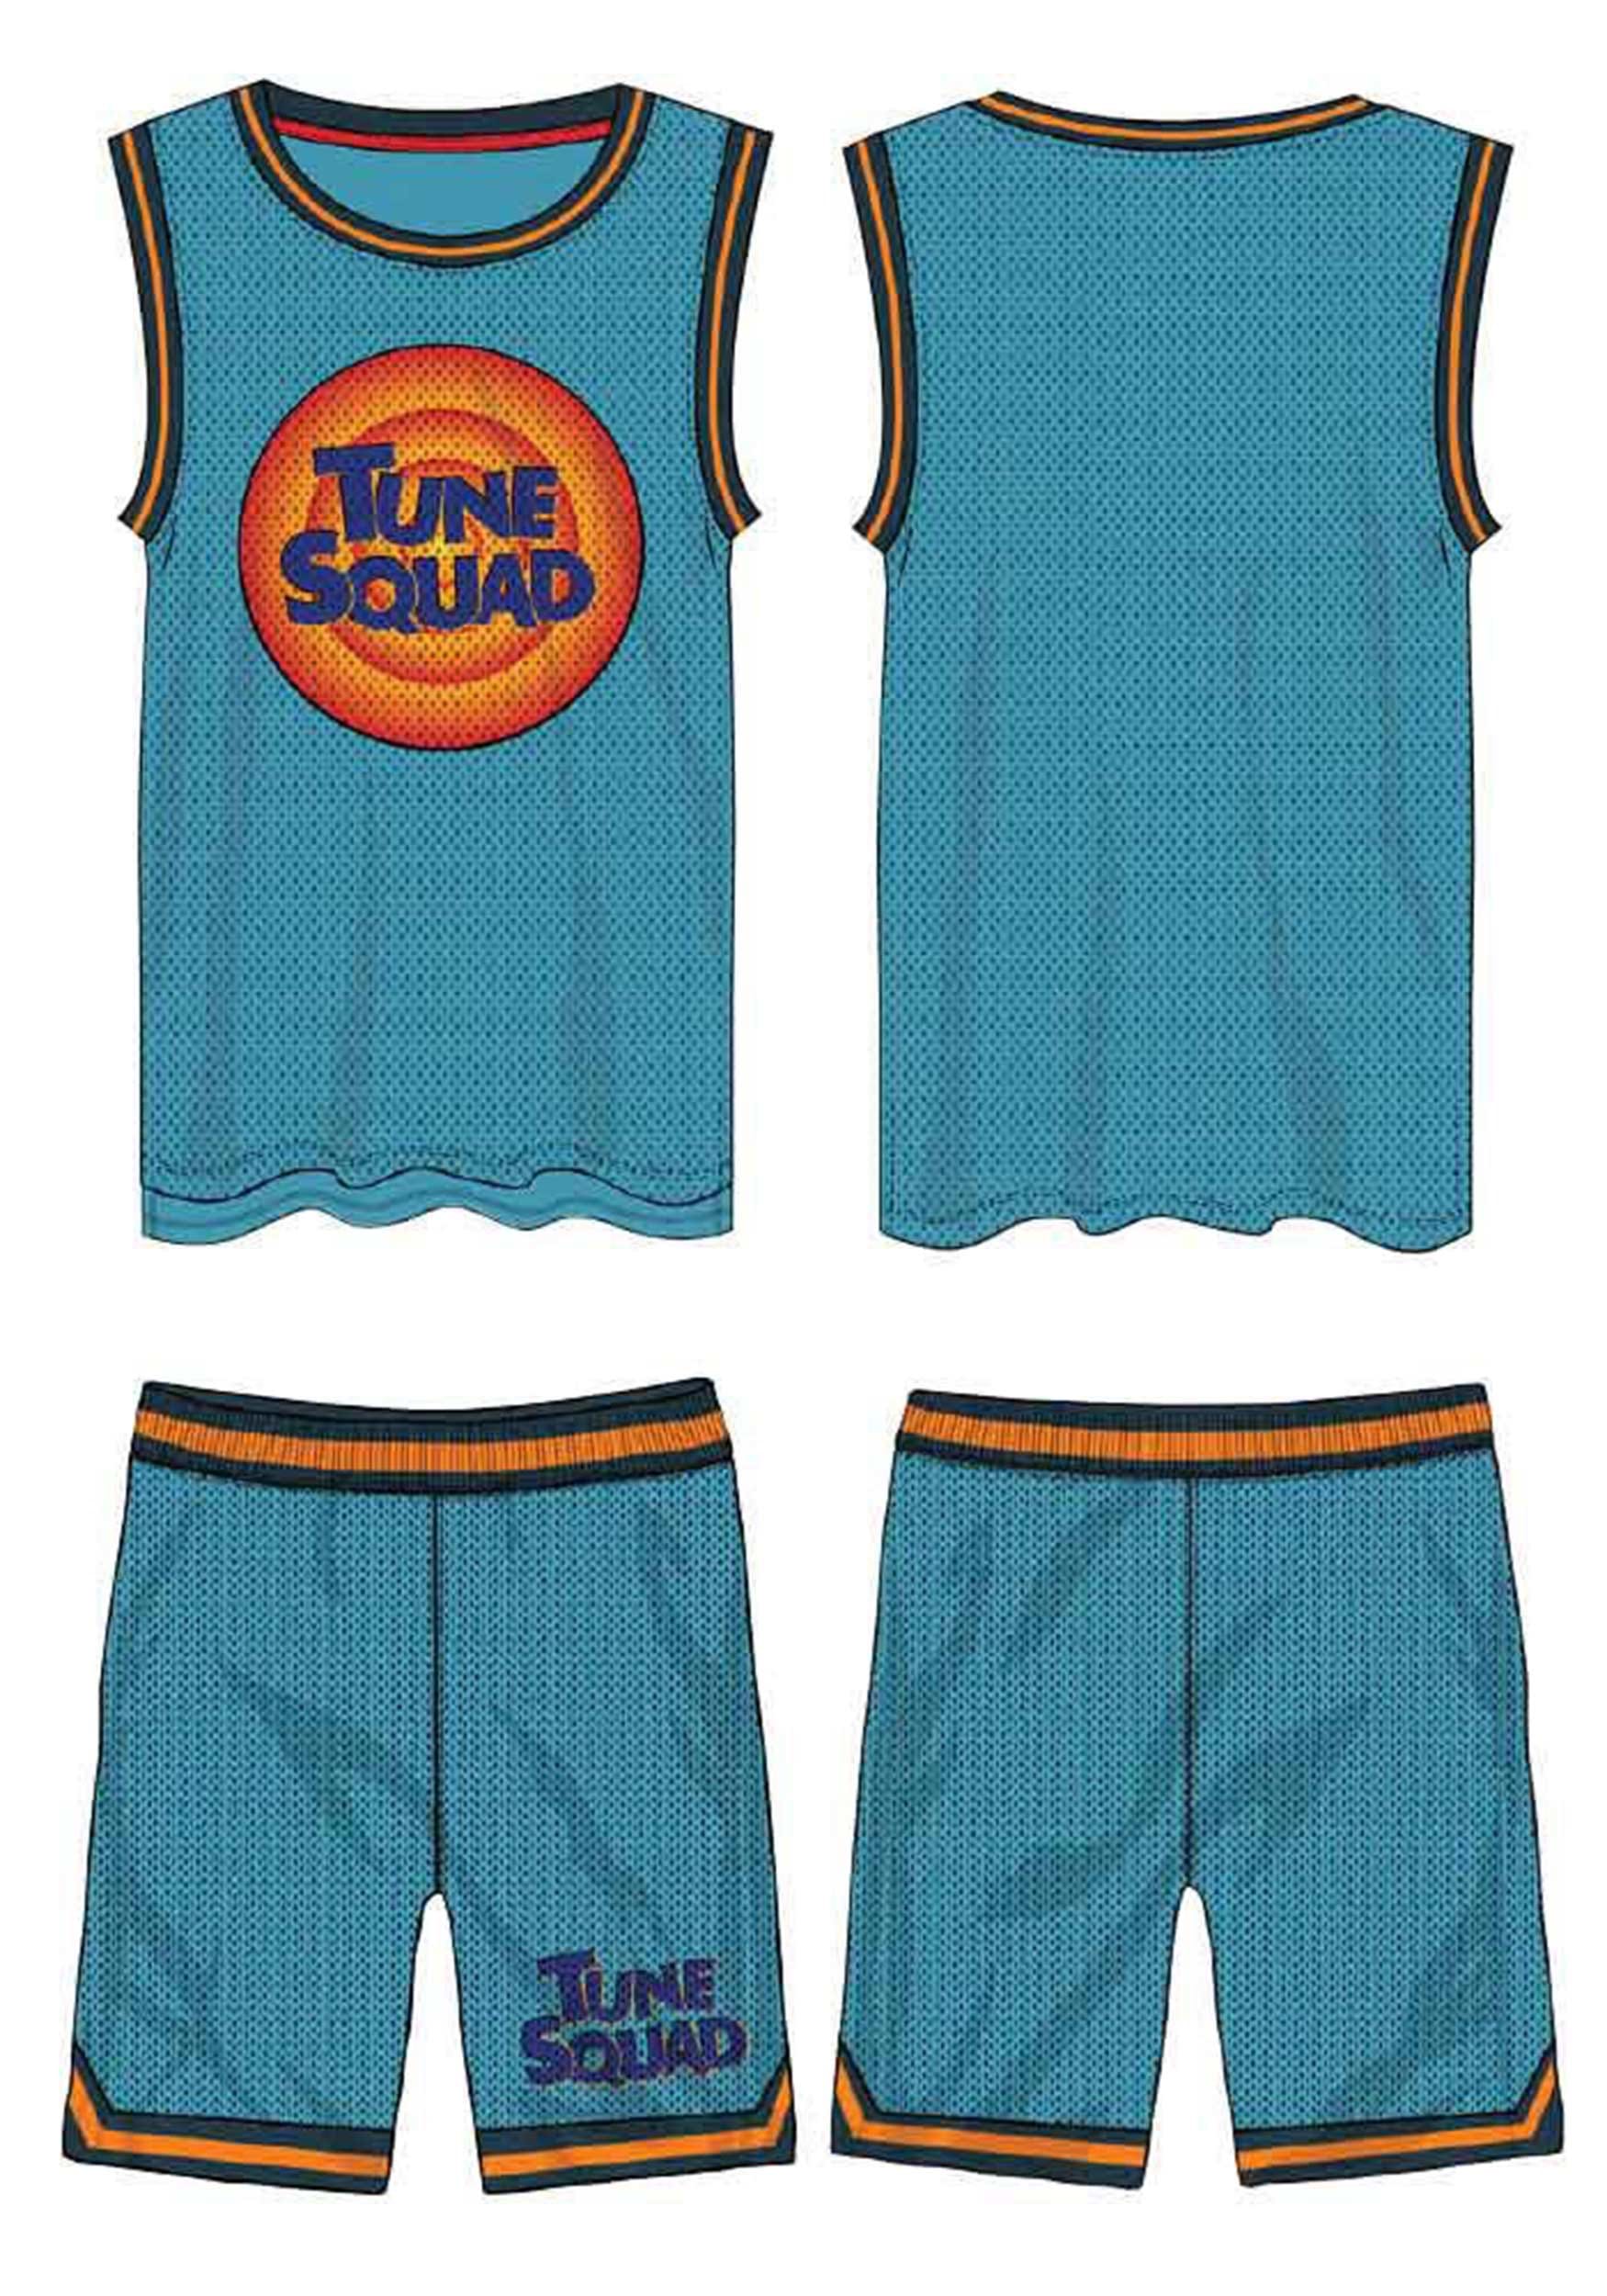 Kids Jersey & Shorts Combo from Space Jam A New Legacy